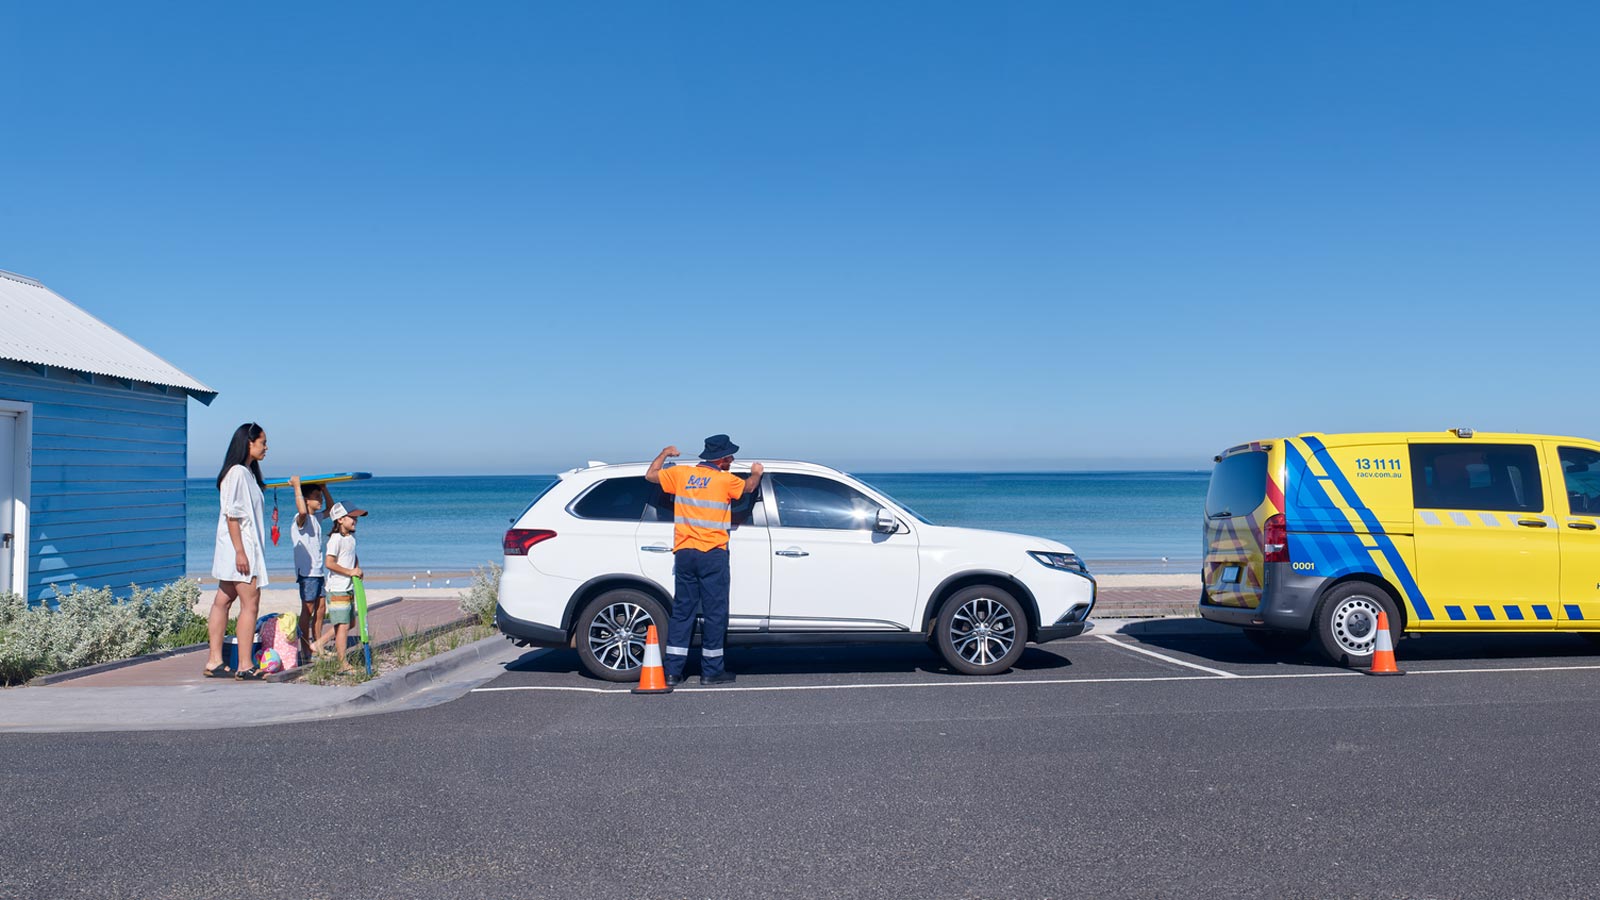 RACV roadside assistance mechanic assessing a family's car at the beach.